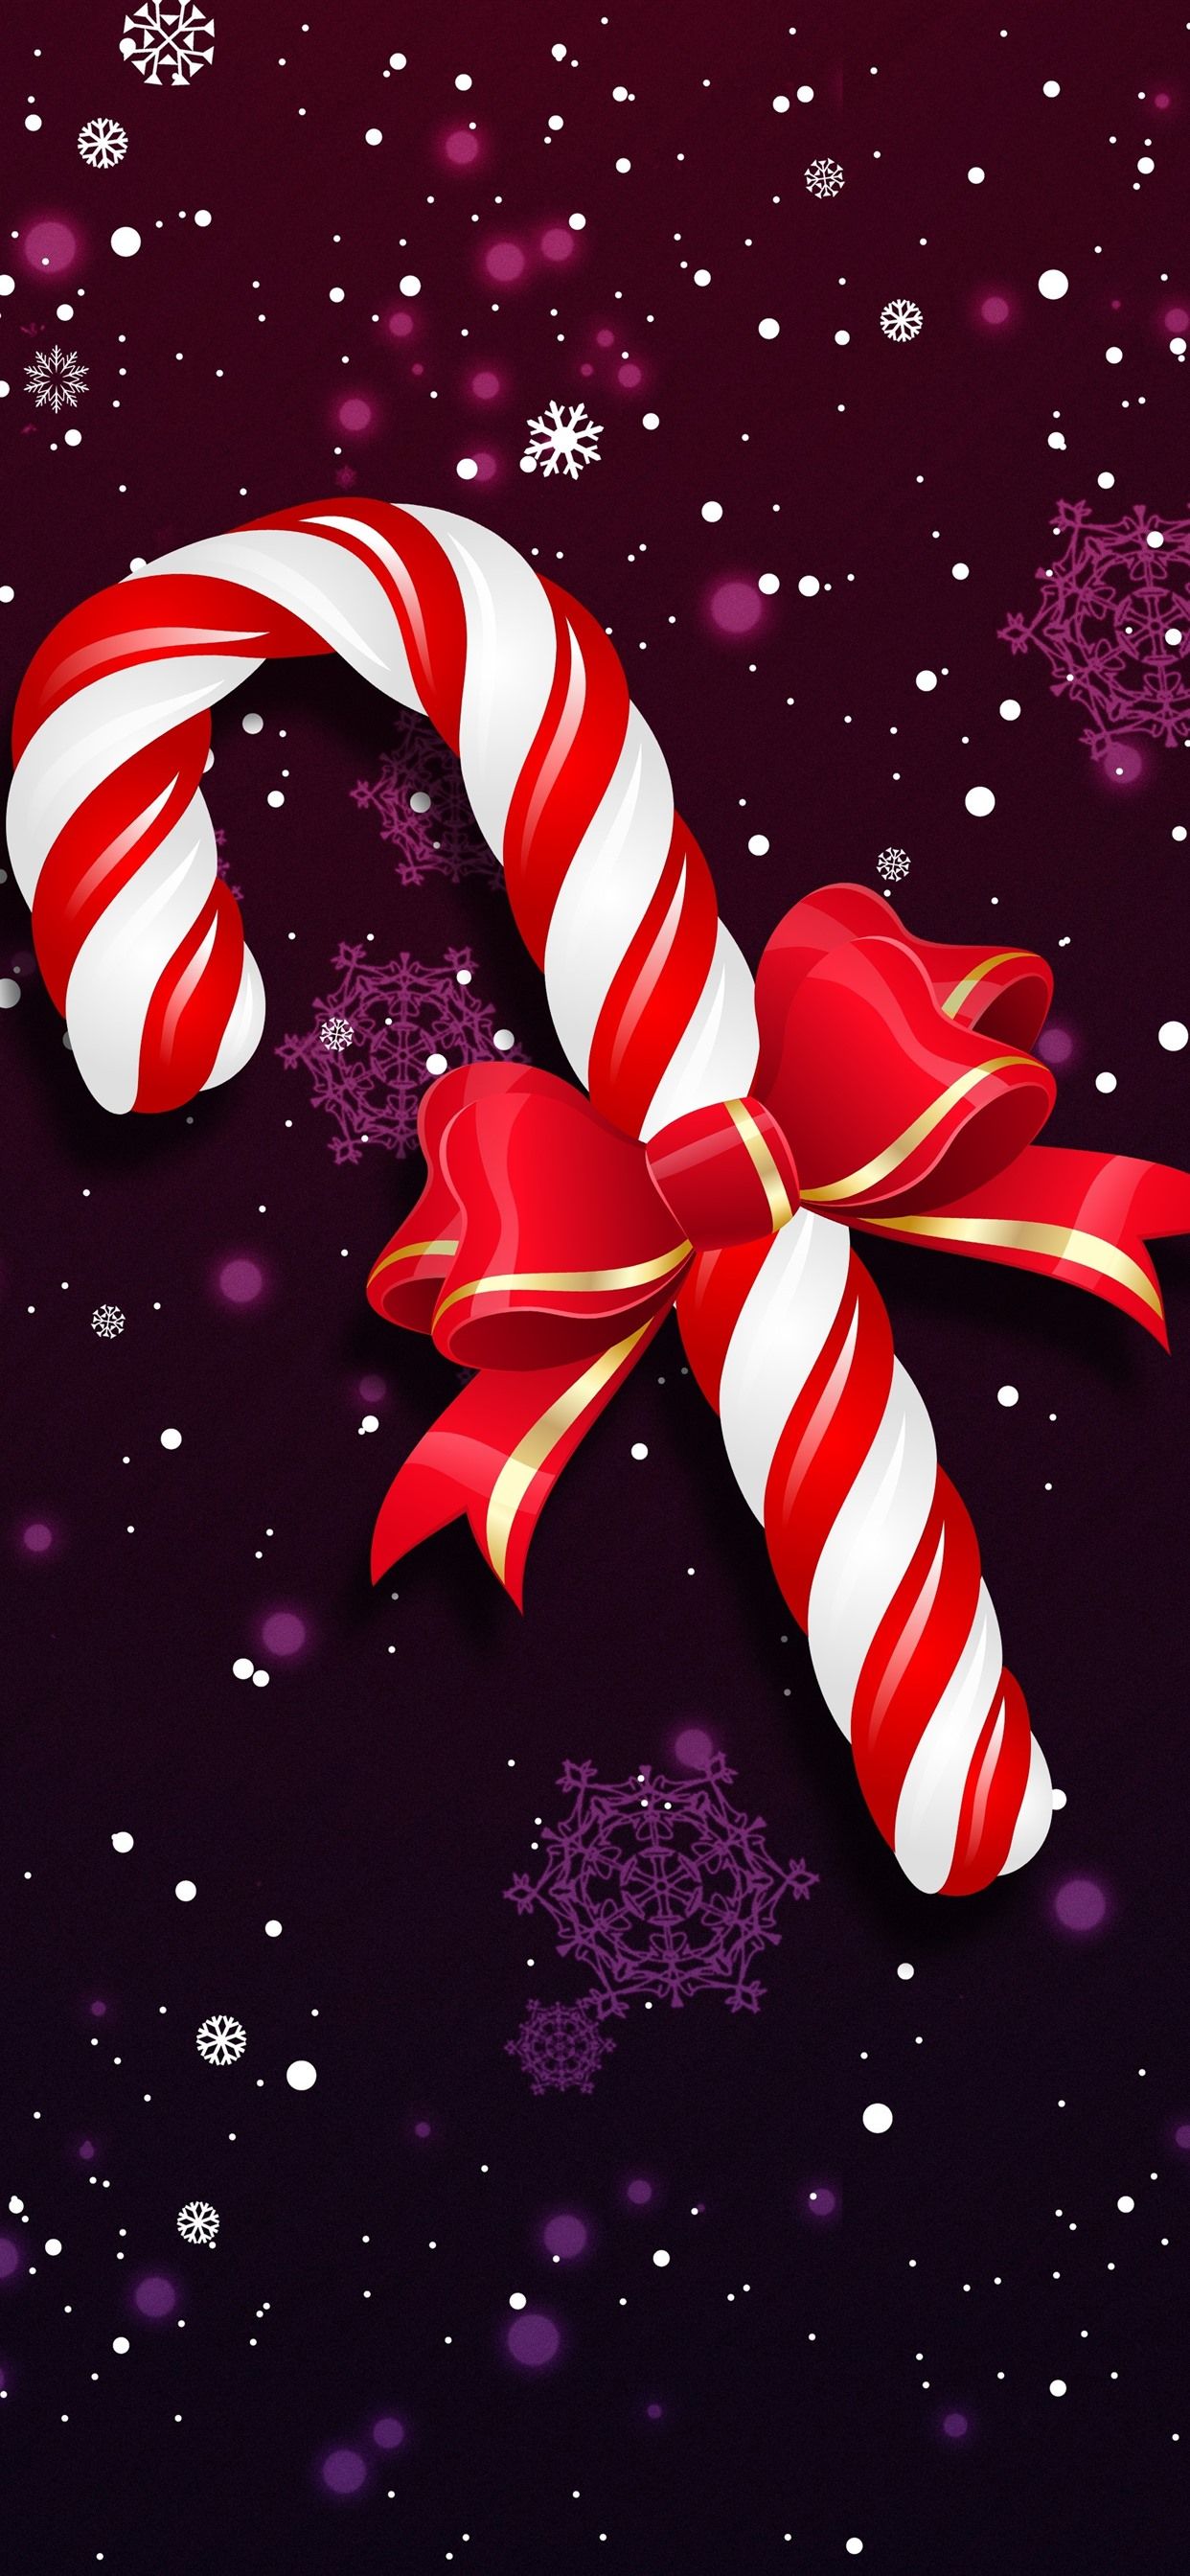 Candy, Snowflakes, Christmas 1242x2688 IPhone 11 Pro XS Max Wallpaper, Background, Picture, Image